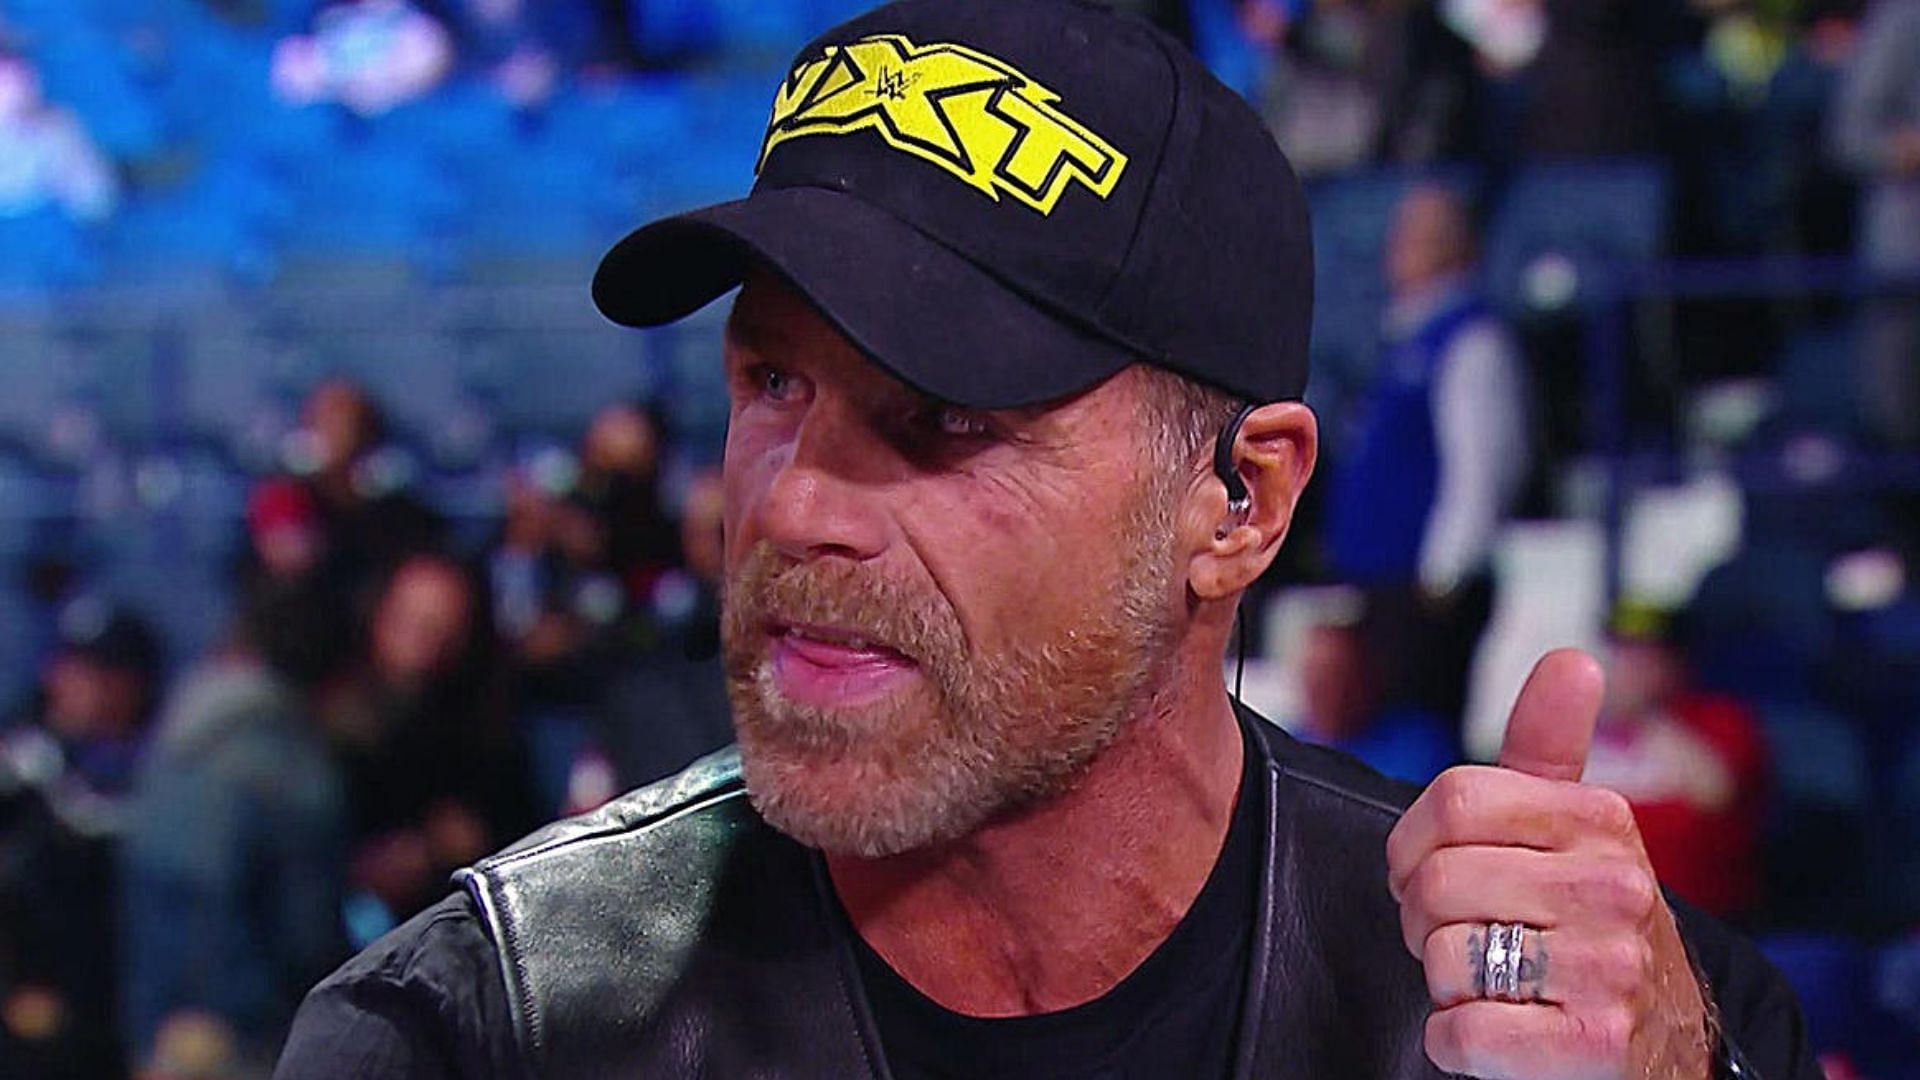 Shawn Michaels is an important member of the NXT creative team